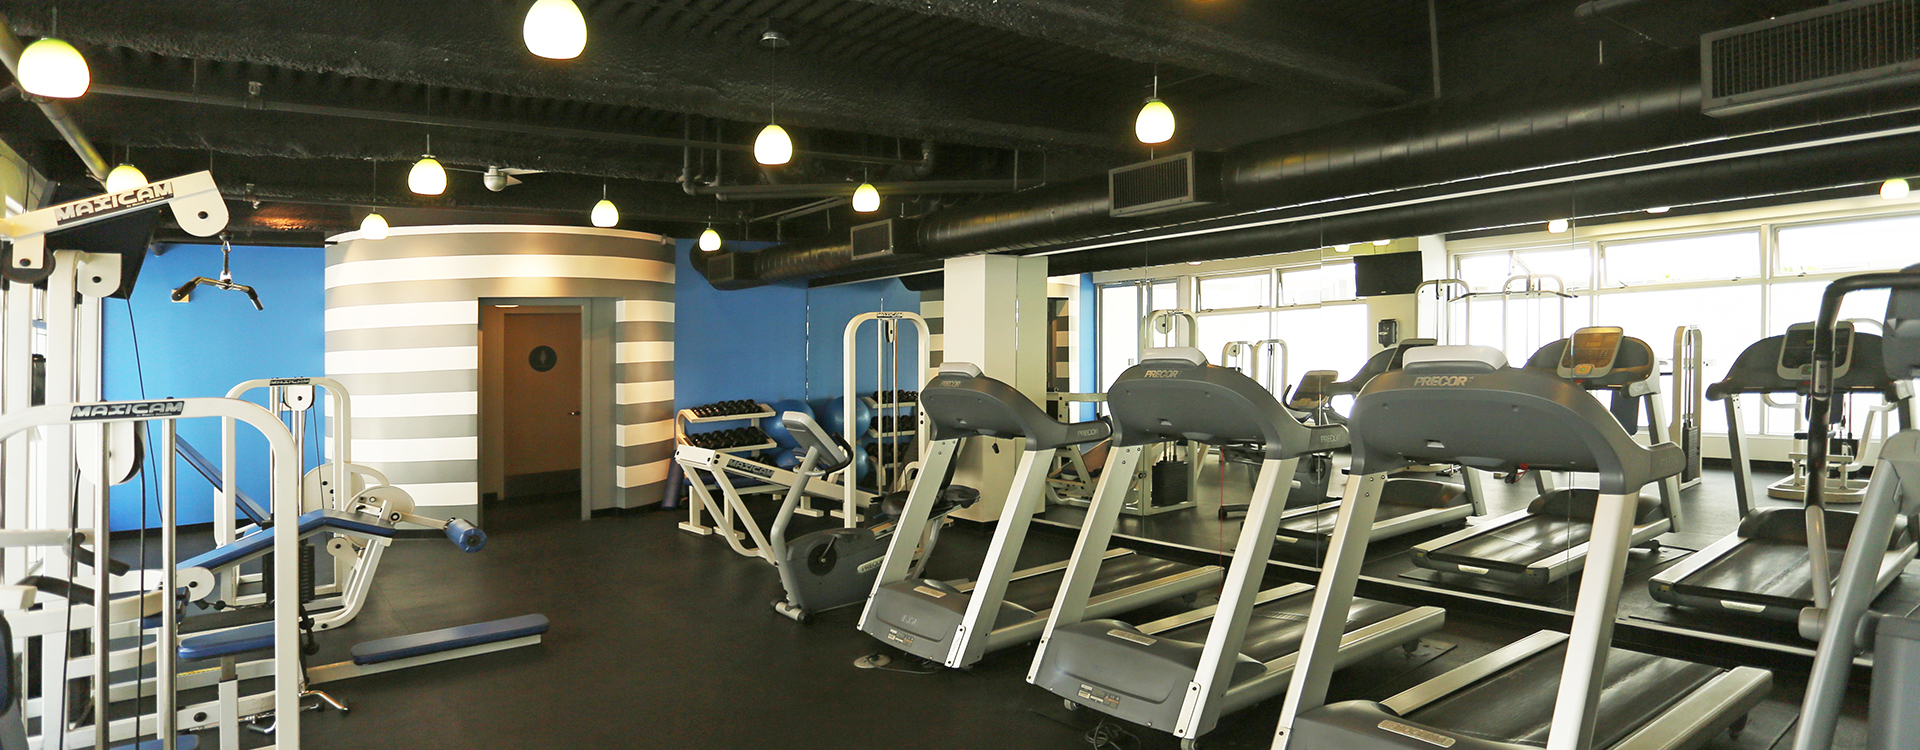 Fitness Center at Pacific Plaza